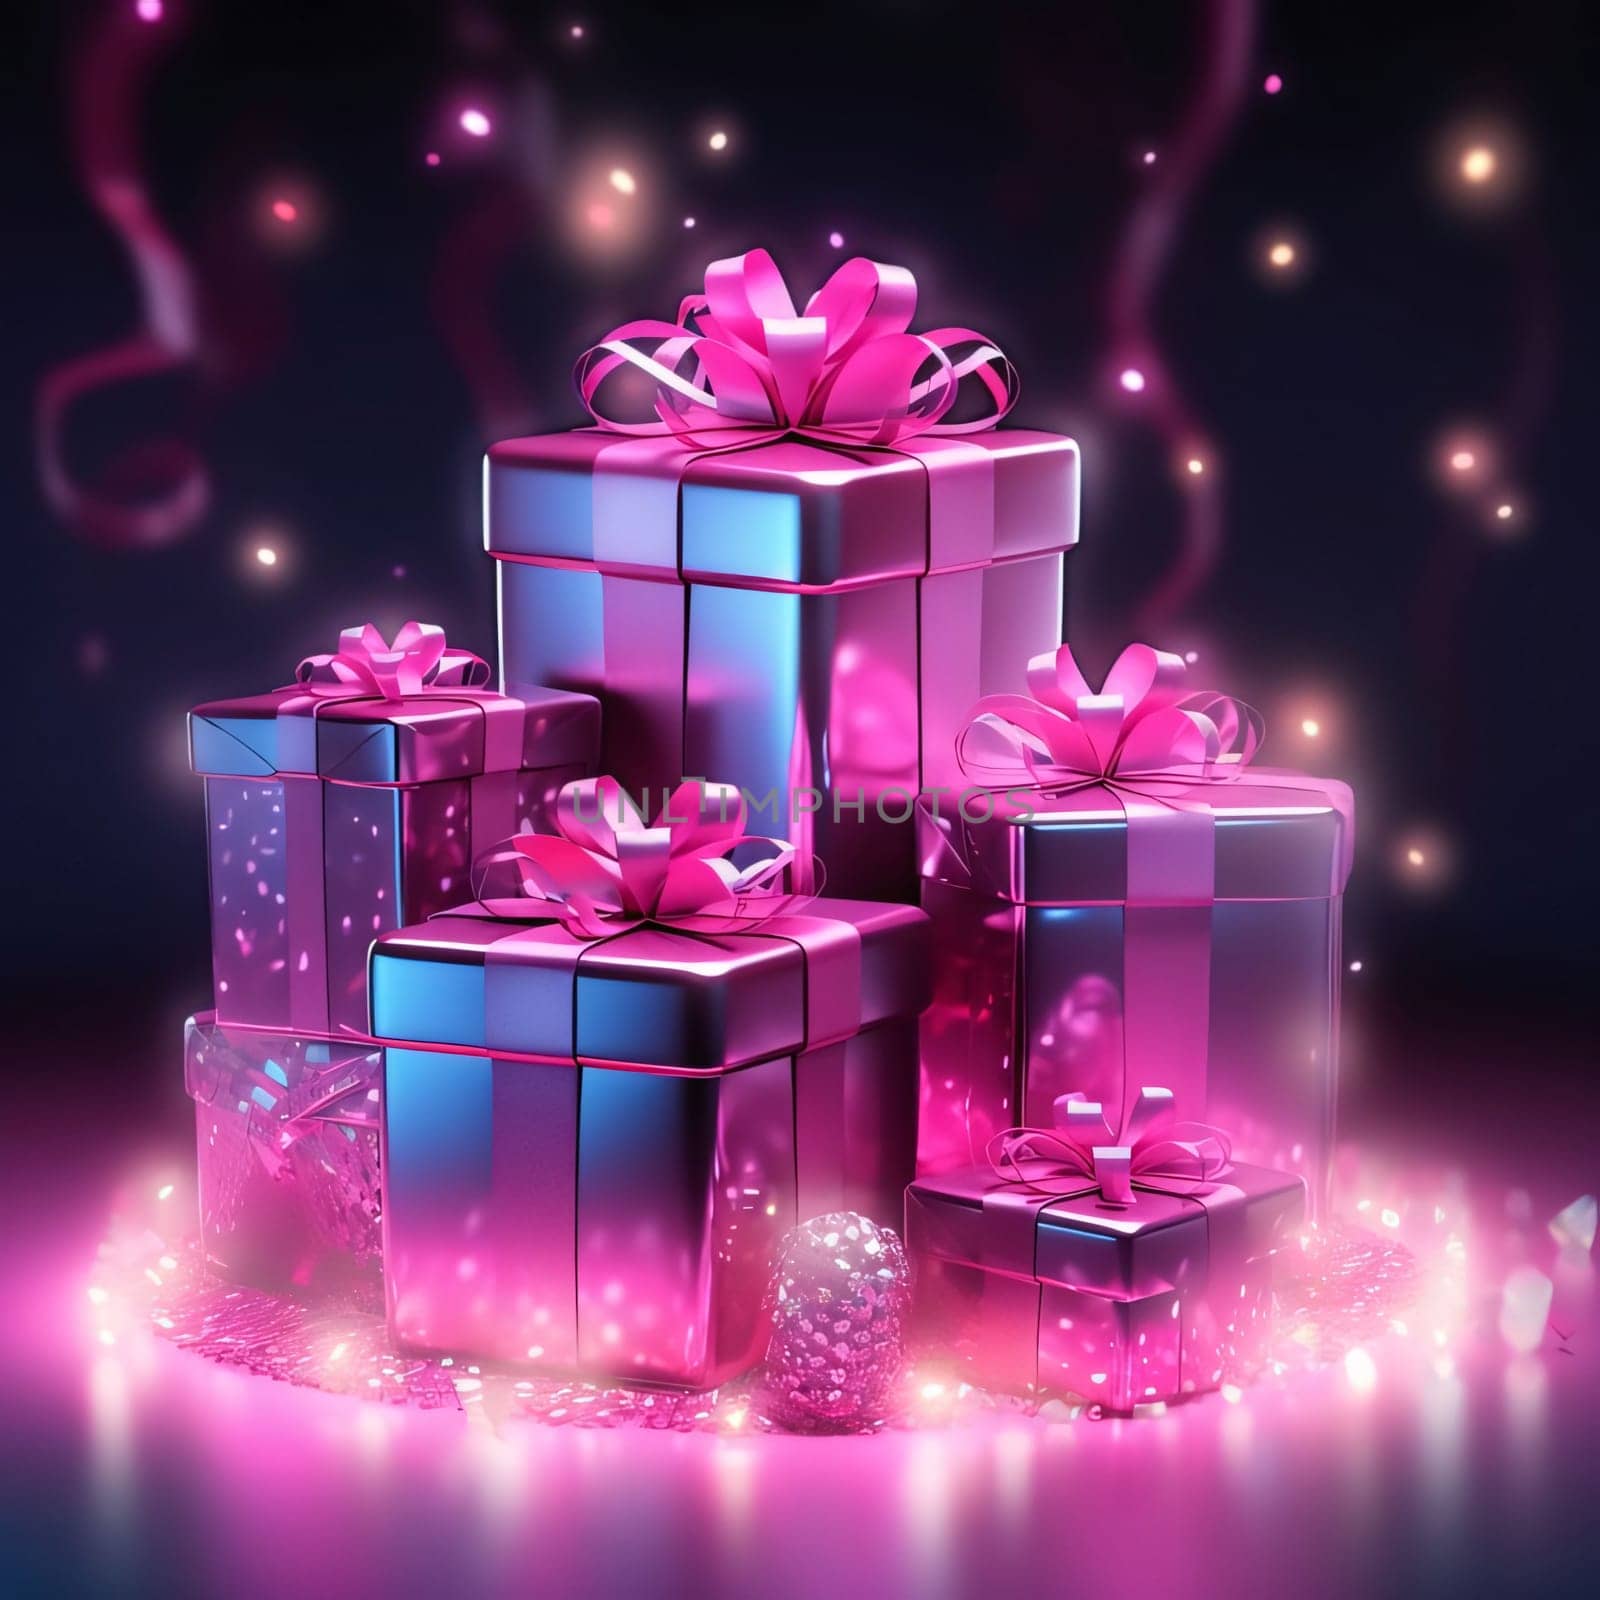 Pink gifts, card jump, lighting effects, black background.Valentine's Day banner with space for your own content. Heart as a symbol of affection and love.